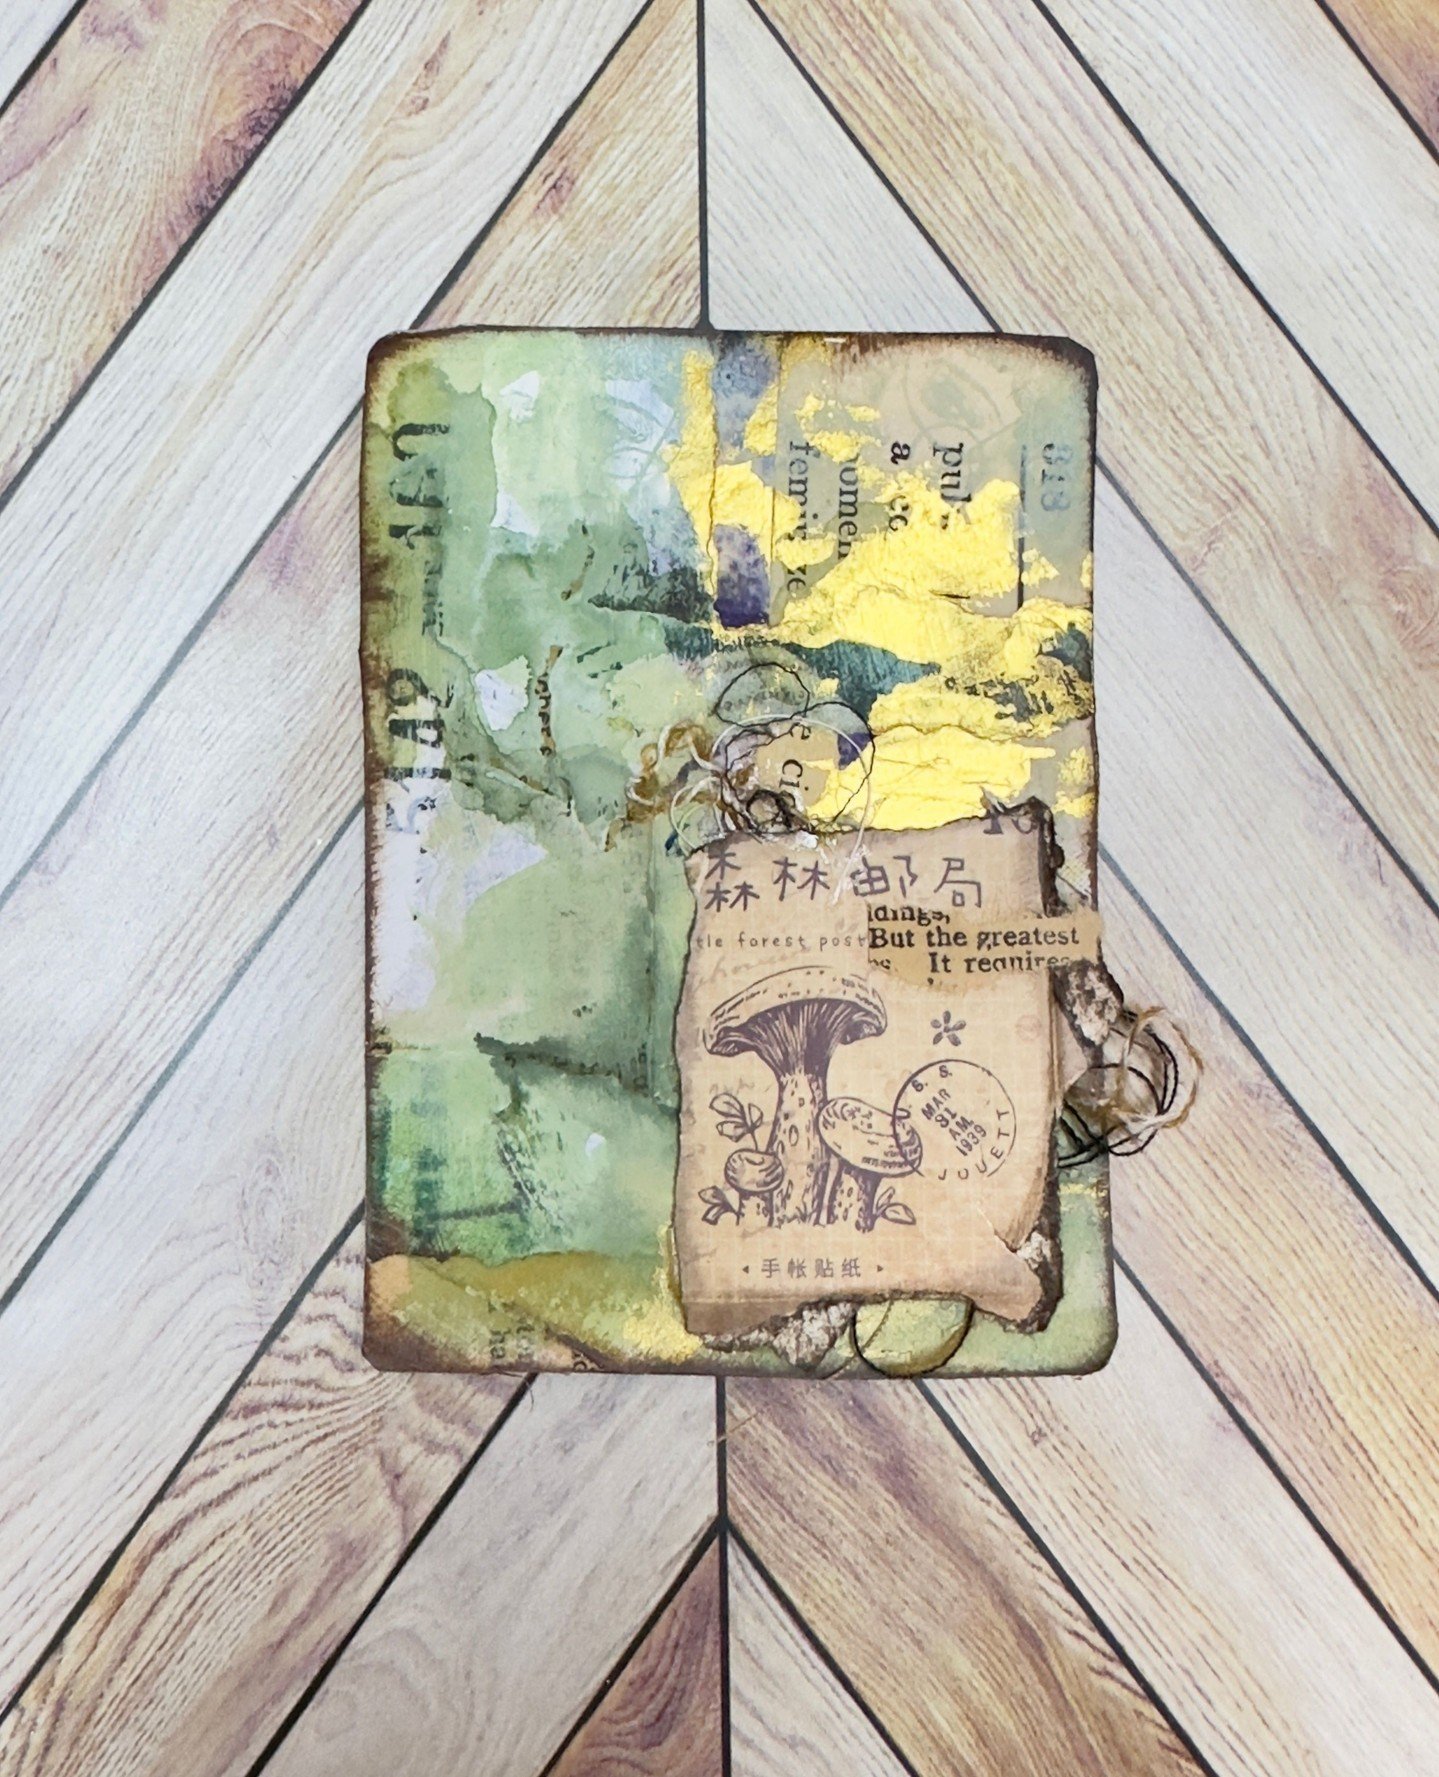 Meet the 10 of &clubs;️'s, card # 17 of my #mixedmediadeckbuild ⁠
⁠
Created in 2023 for #craftyhopeprompts a prompt deck challenge that was created by @craftyhope and using her week 17 prompts of ⁠
Metallic paint, border stamp and botanical.⁠
⁠
#real